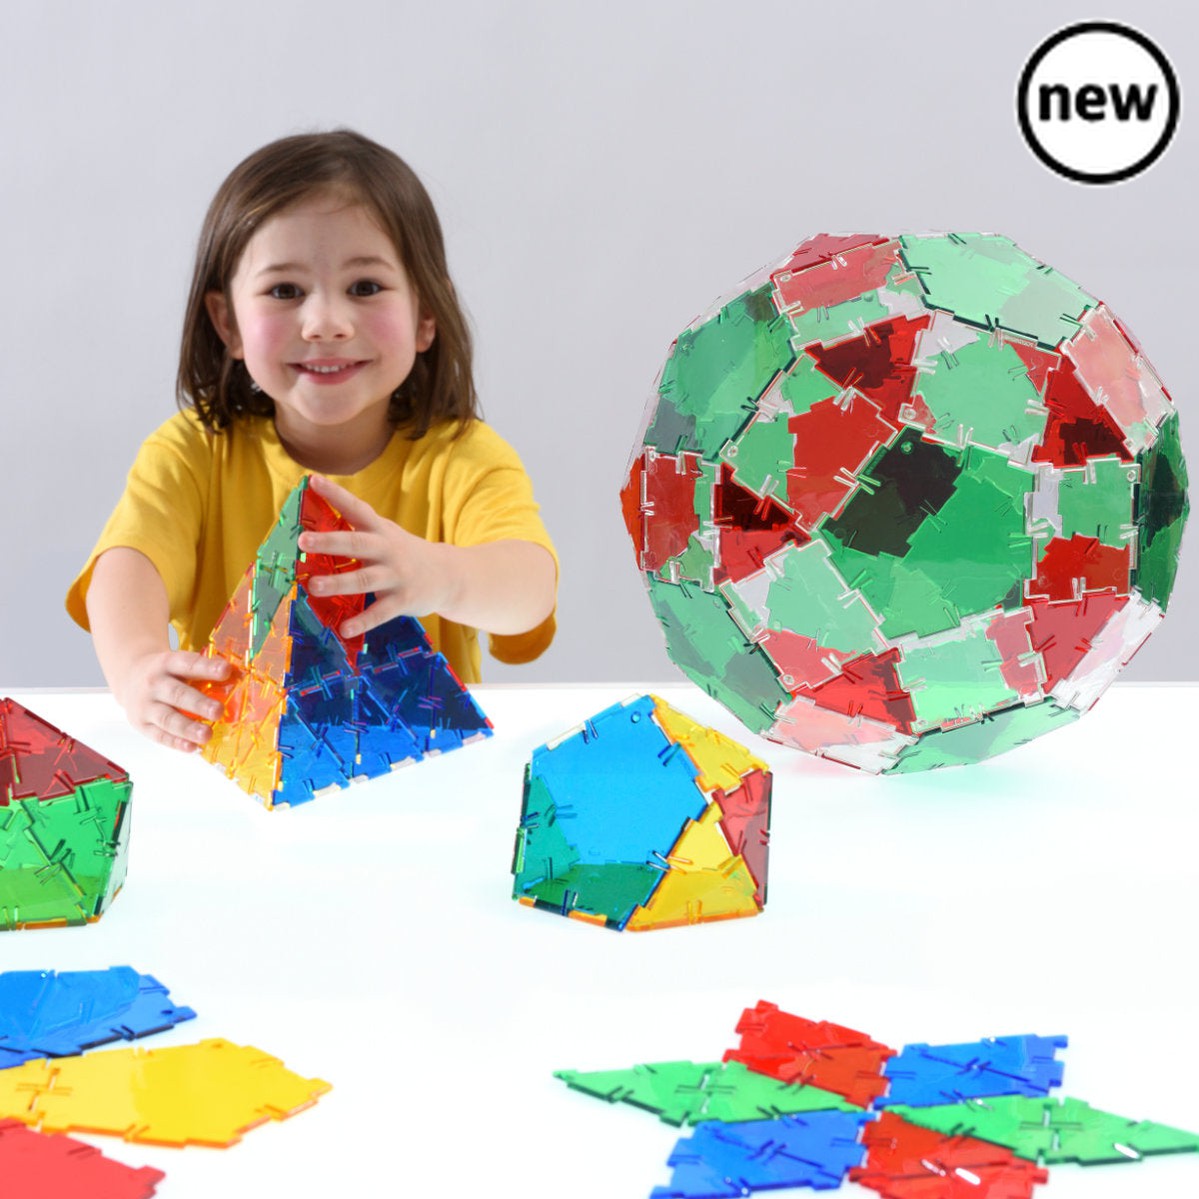 Crystal Polydron Basic Set, The Crystal Polydron Basic Set is a fantastic educational tool that helps children develop spatial awareness and creativity. With its 3 key shapes - squares, equilateral triangles, and pentagons - children can easily construct their first 2D and 3D shapes.This set is perfect for use on a light table or against a light source. By placing the transparent pieces on these surfaces, children can see inside solid structures and gain a better understanding of shape and space. This uniqu